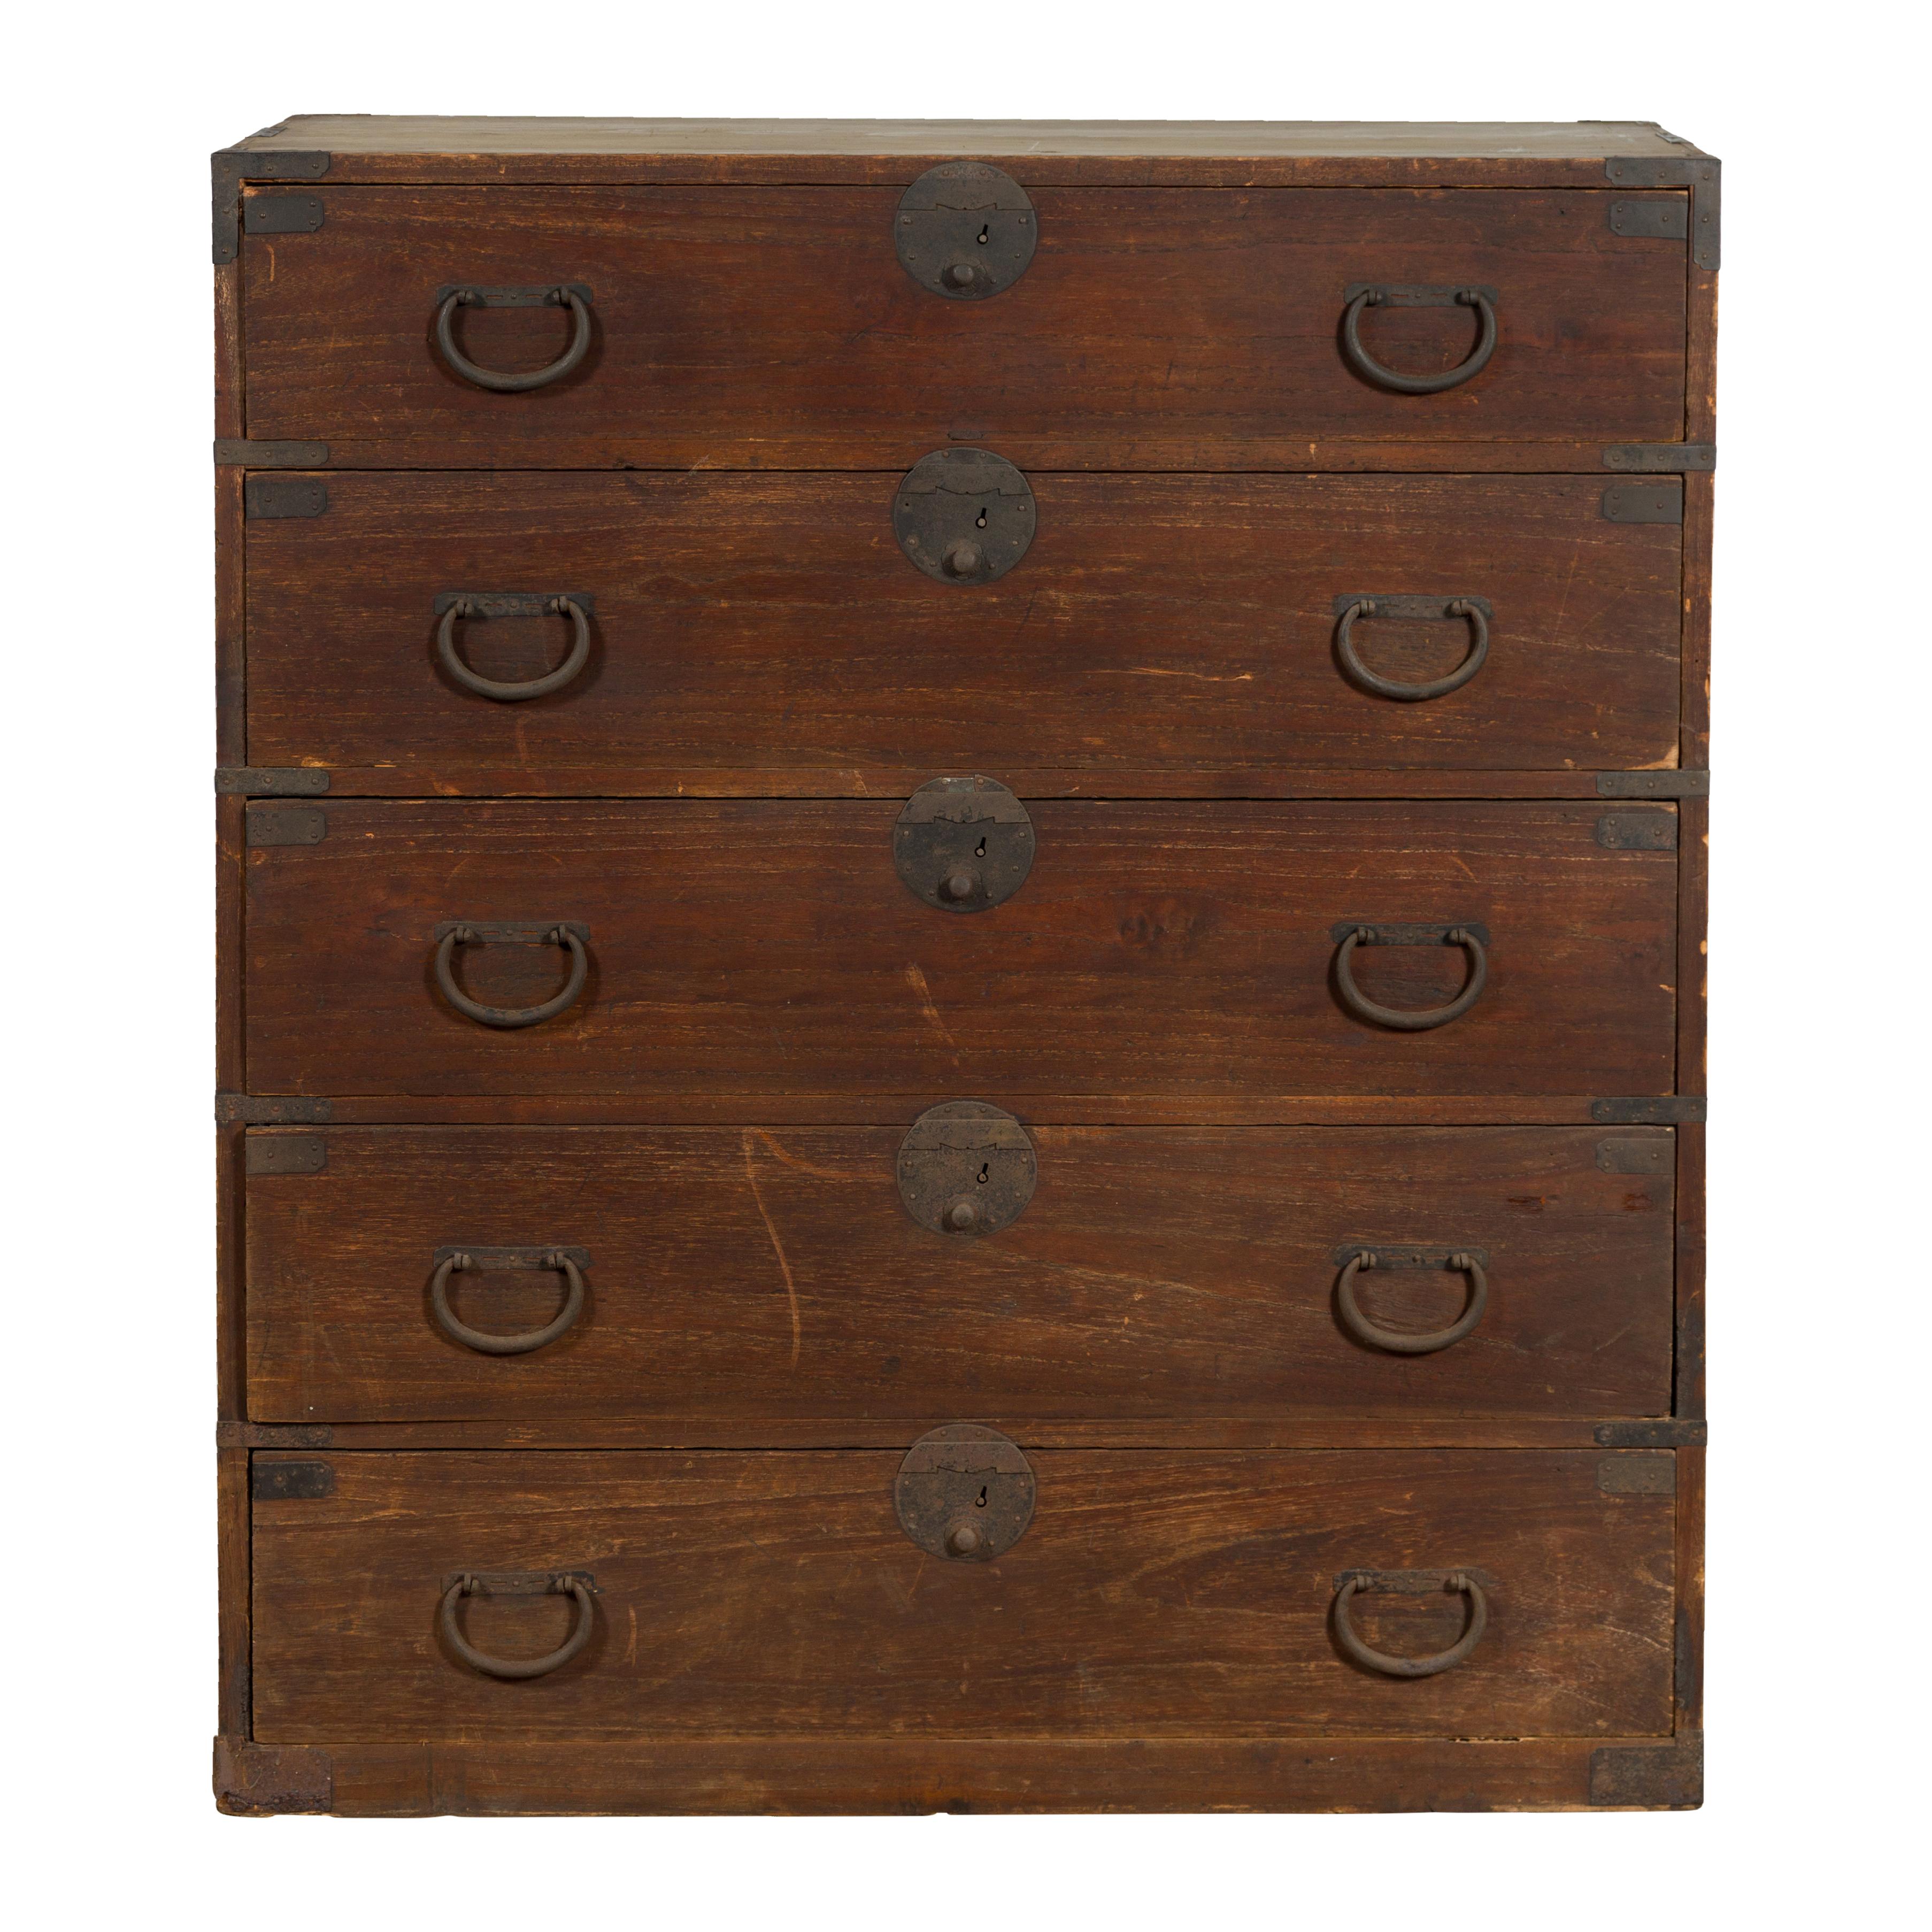 Japanese Taishō Tansu Clothing Chest in Isho-Dansu Style with Five Drawers 12